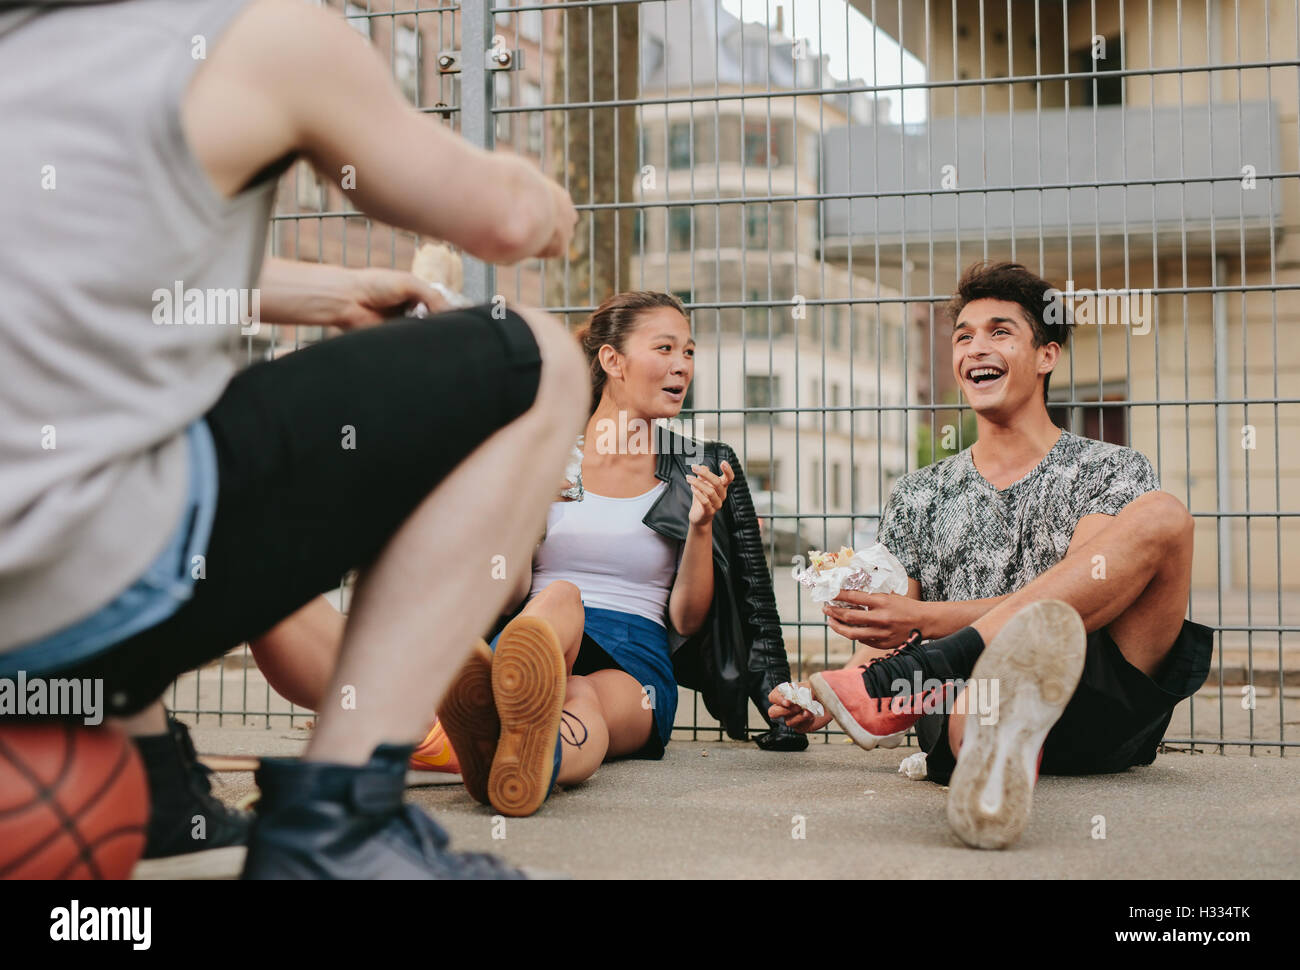 Shot of young men and woman relaxing outdoors and having fun. Group of friends hanging out on basketball court. Stock Photo